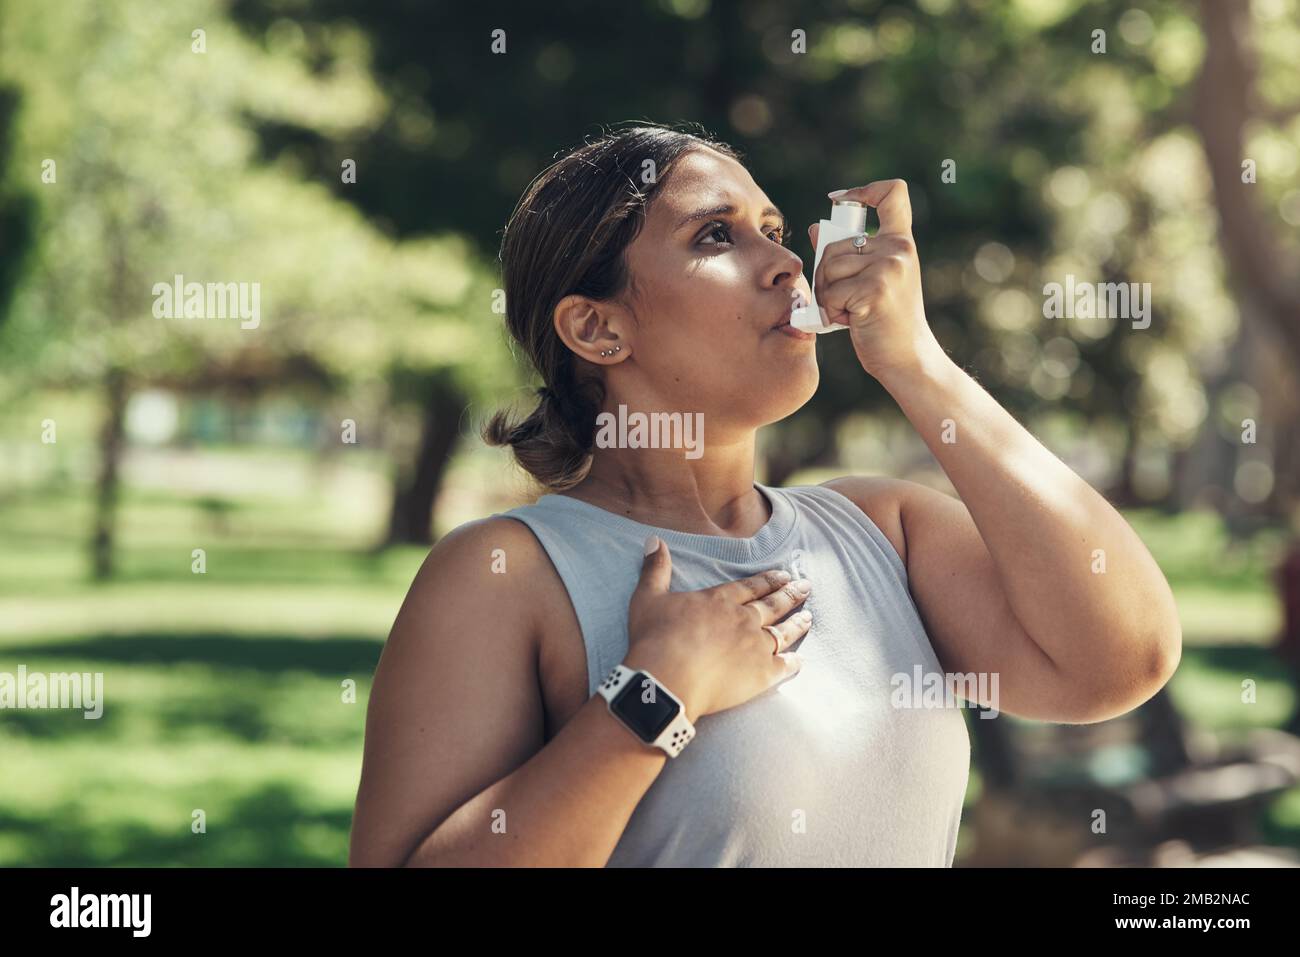 Regular exercise has really helped my asthma. a young woman taking a break during a workout to use her asthma pump. Stock Photo